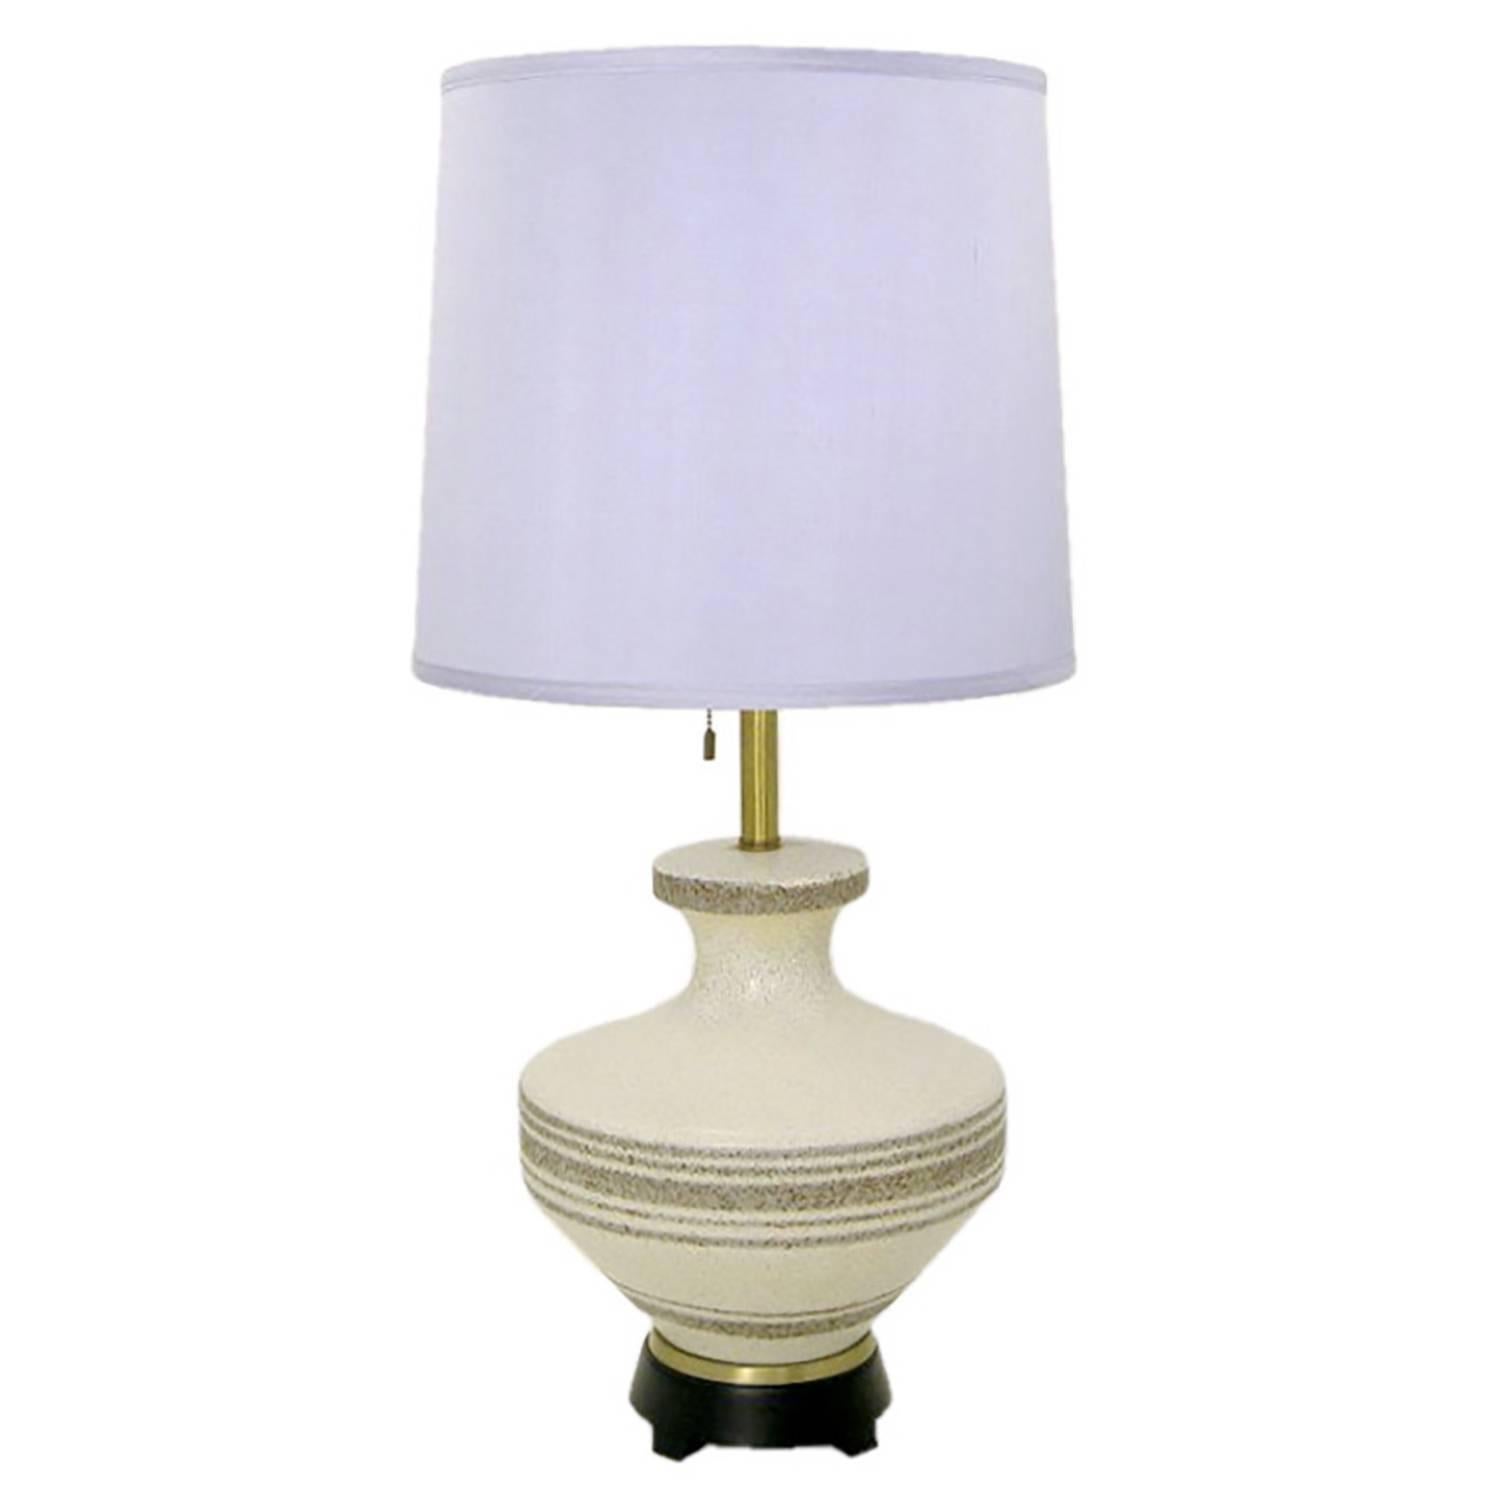 Lightolier Hand Thrown Stippled Glaze and Striped Pottery Table Lamp